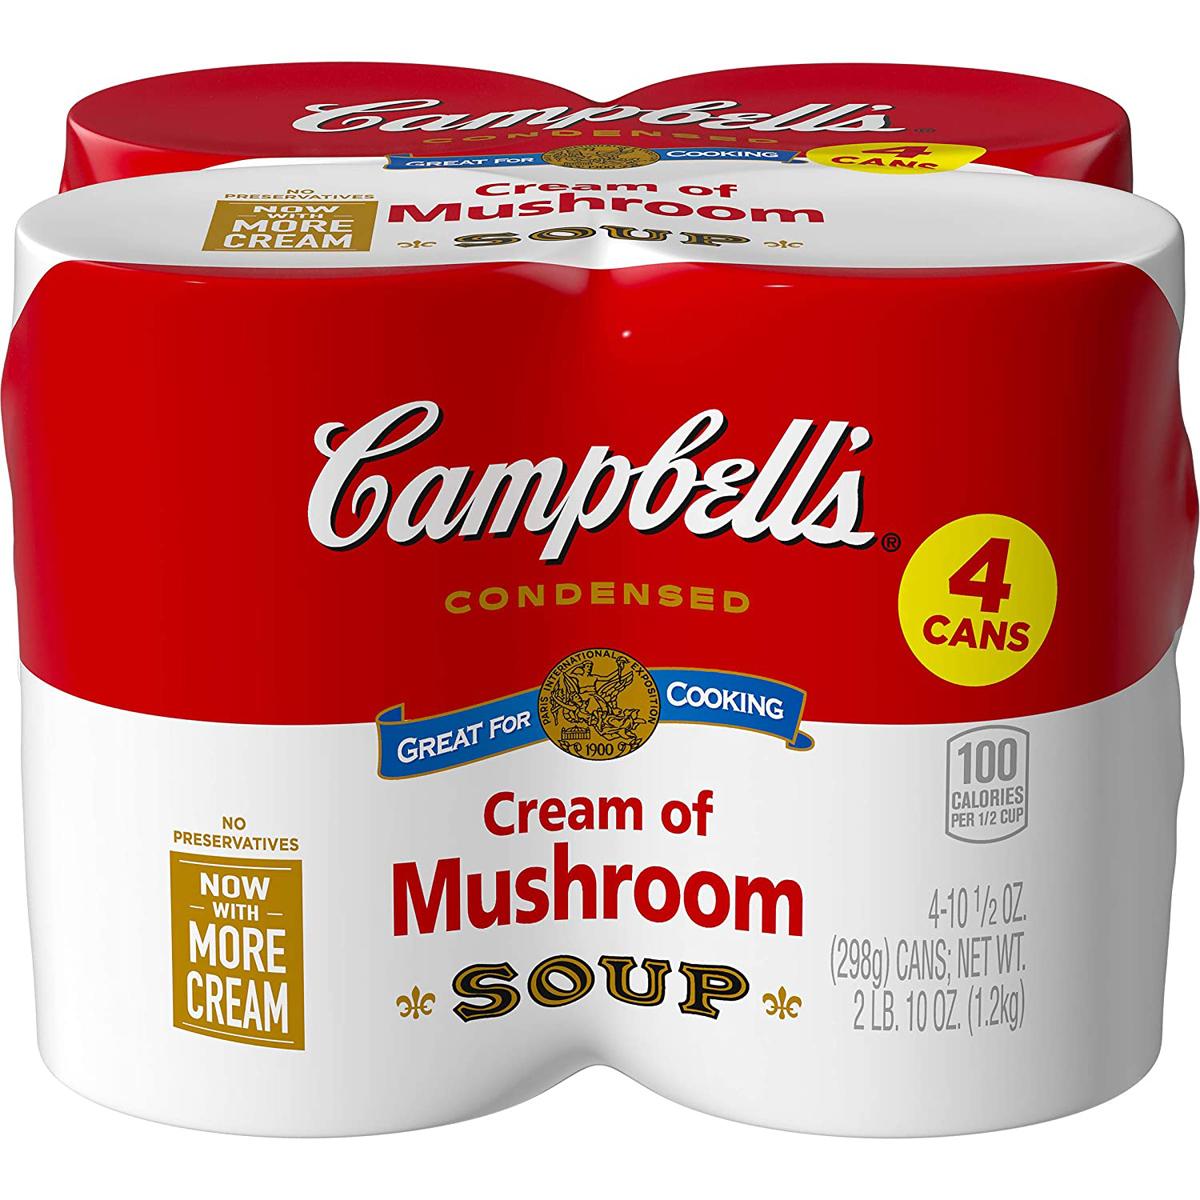 4 Campbells Cream of Mushroom Condensed Soup for $3.17 Shipped